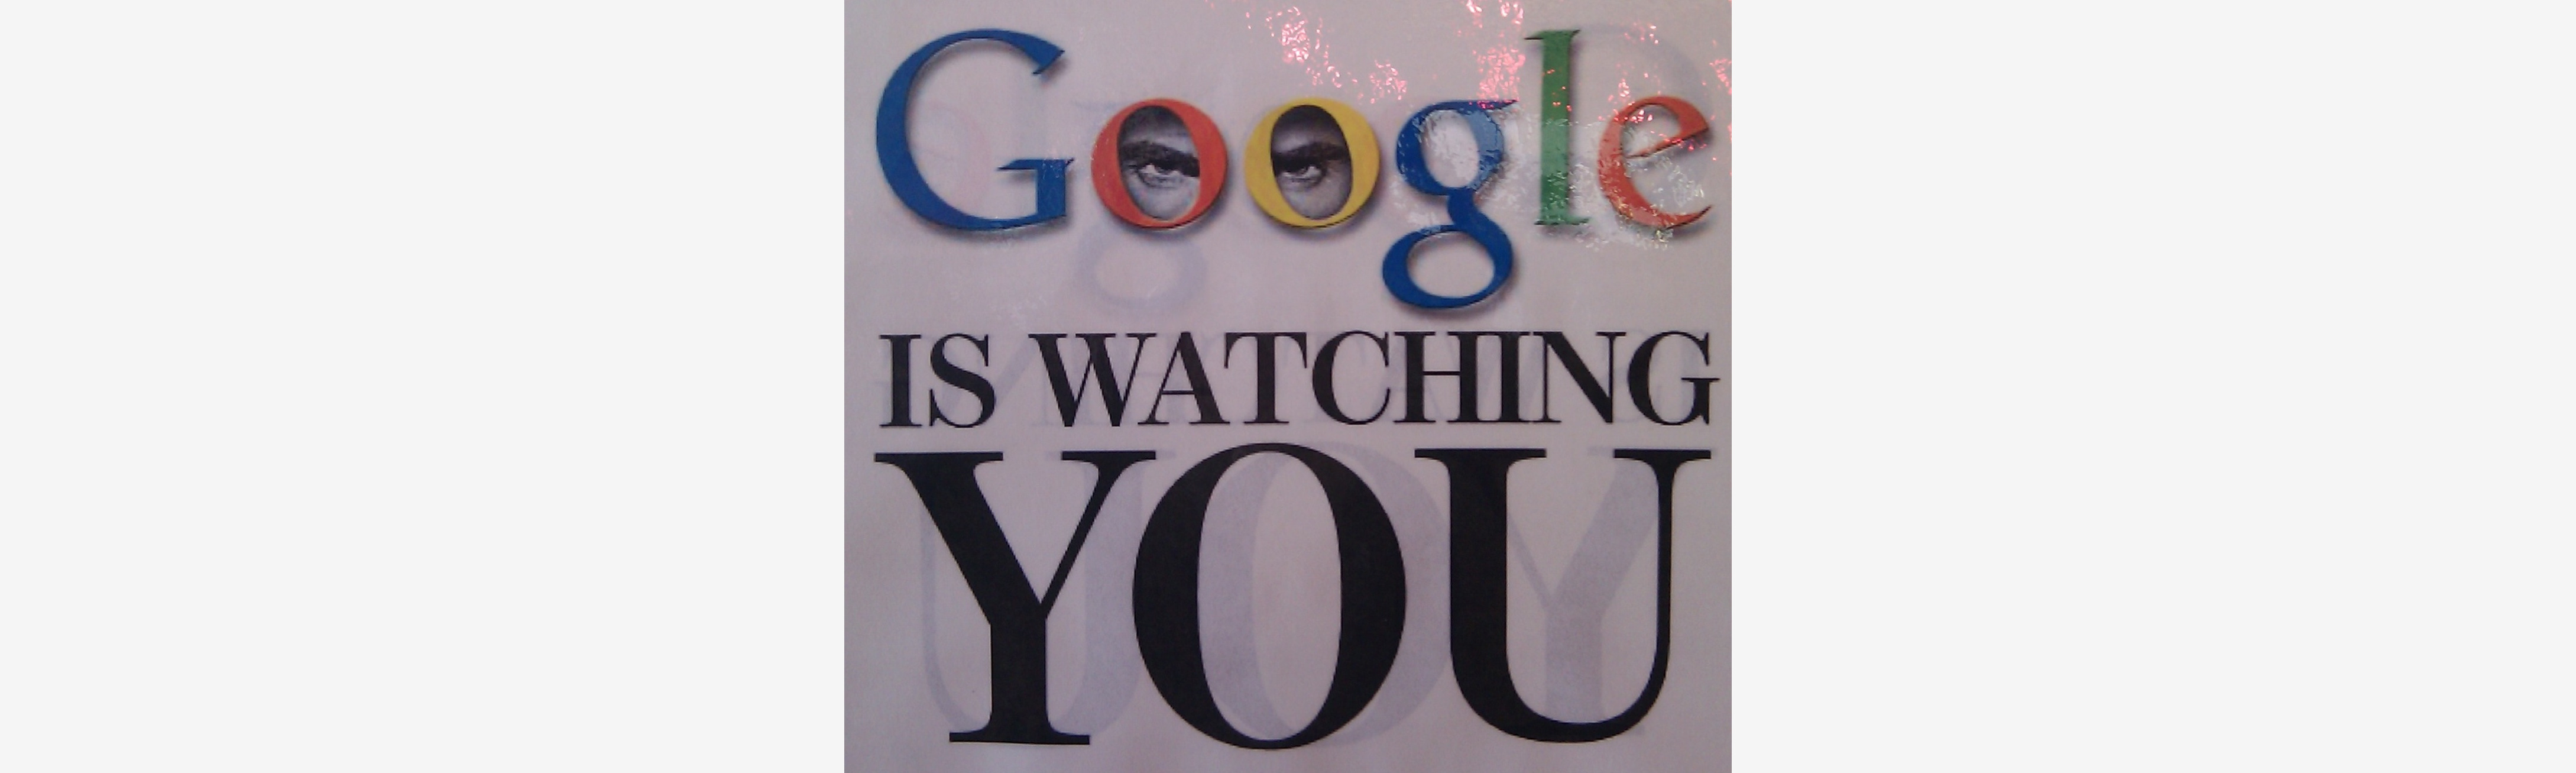 Leave Google now: Switch to privacy-friendly services to stop being tracked.